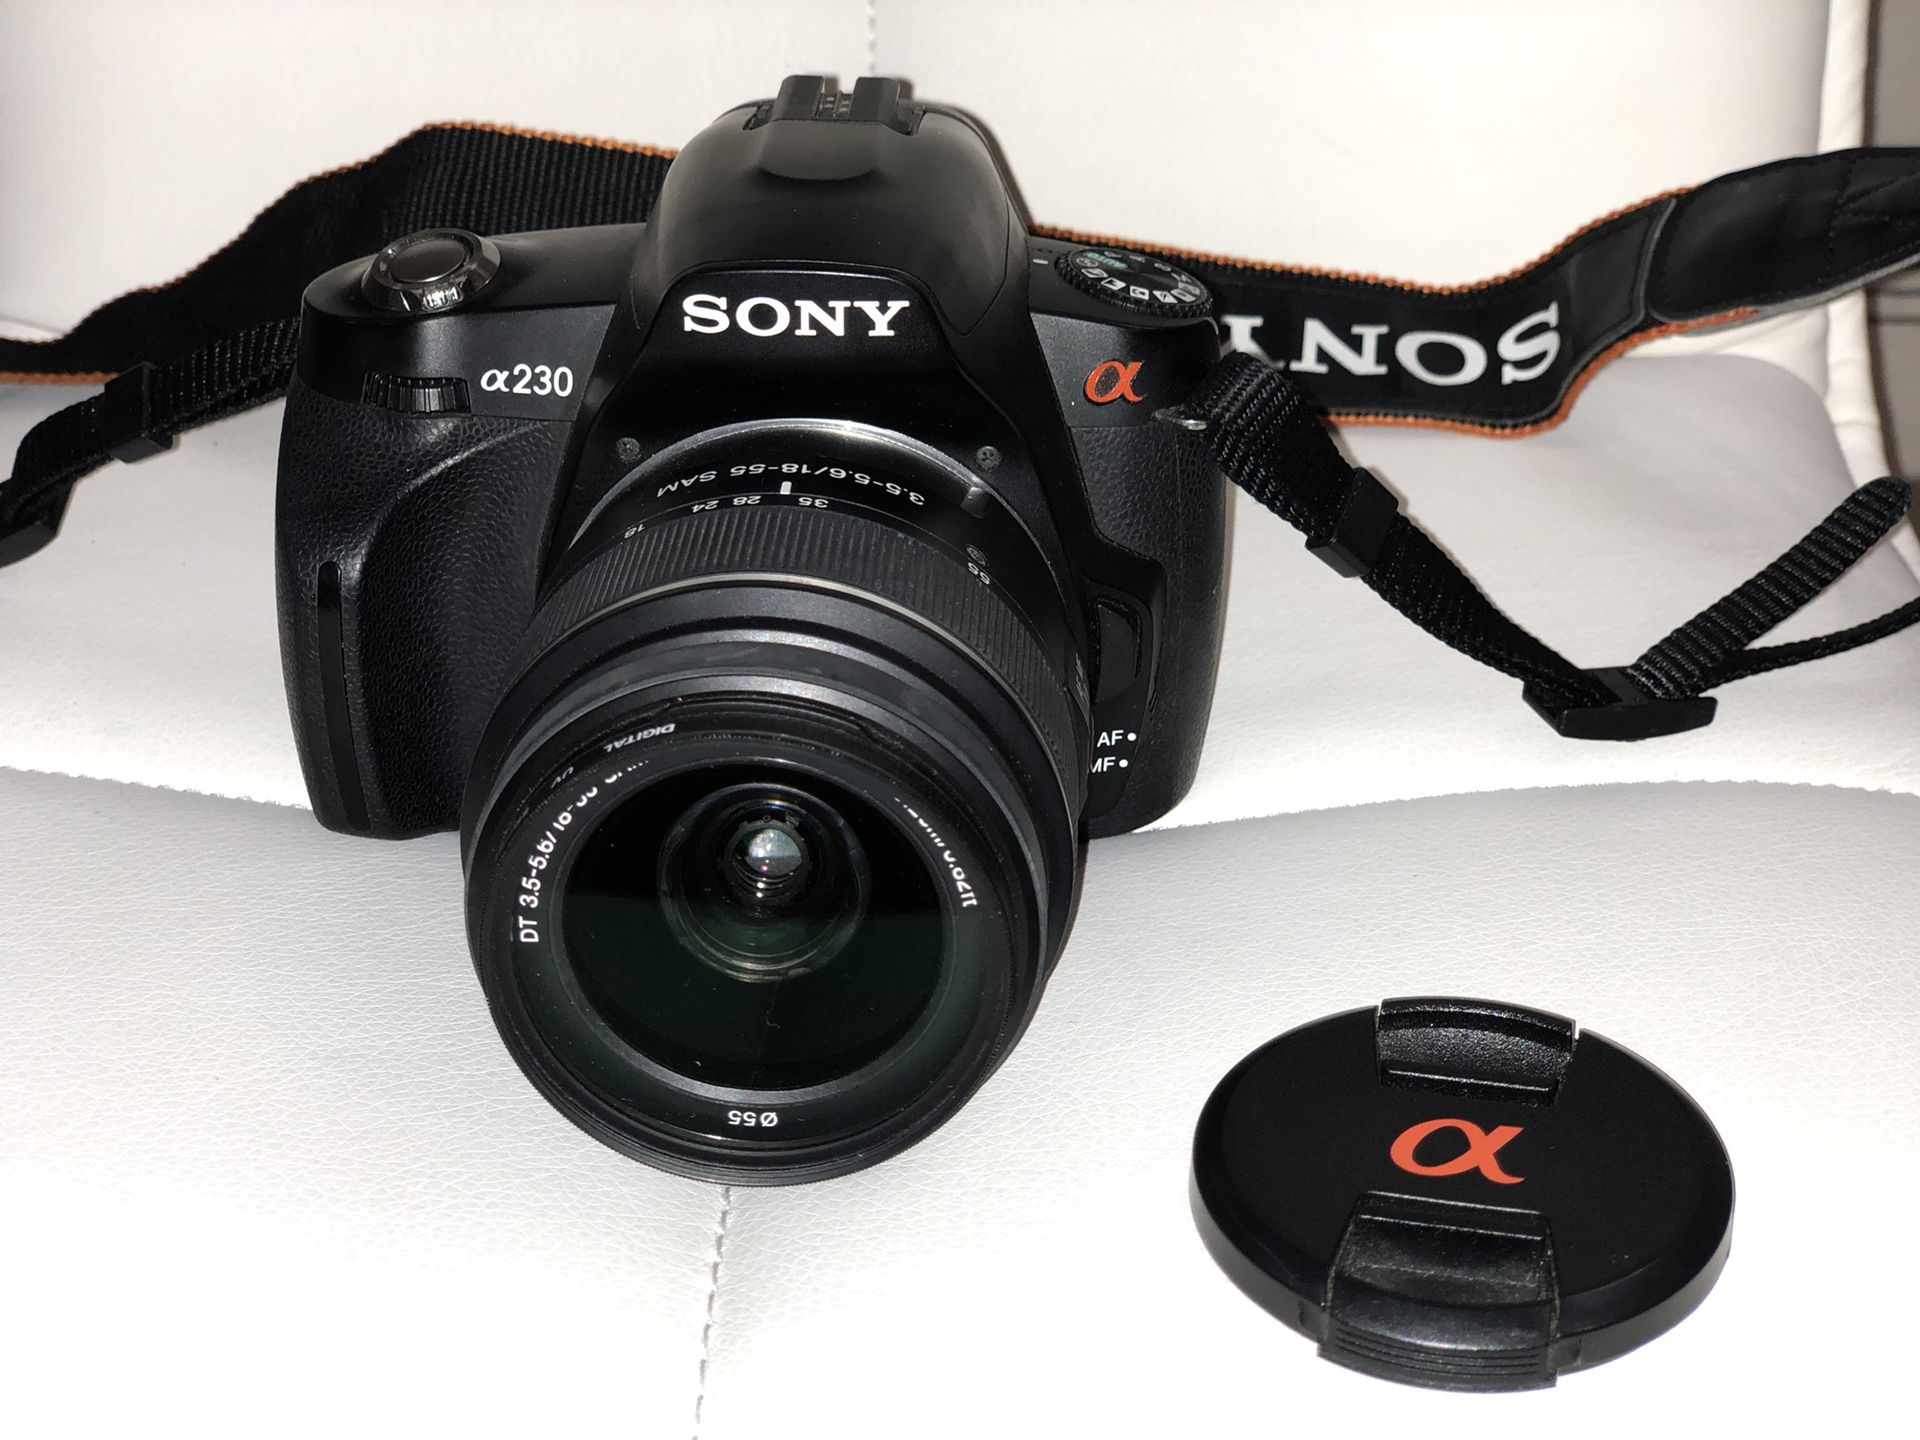 Sony Alpha DSLR-A230 with full kit and 2 SD cards